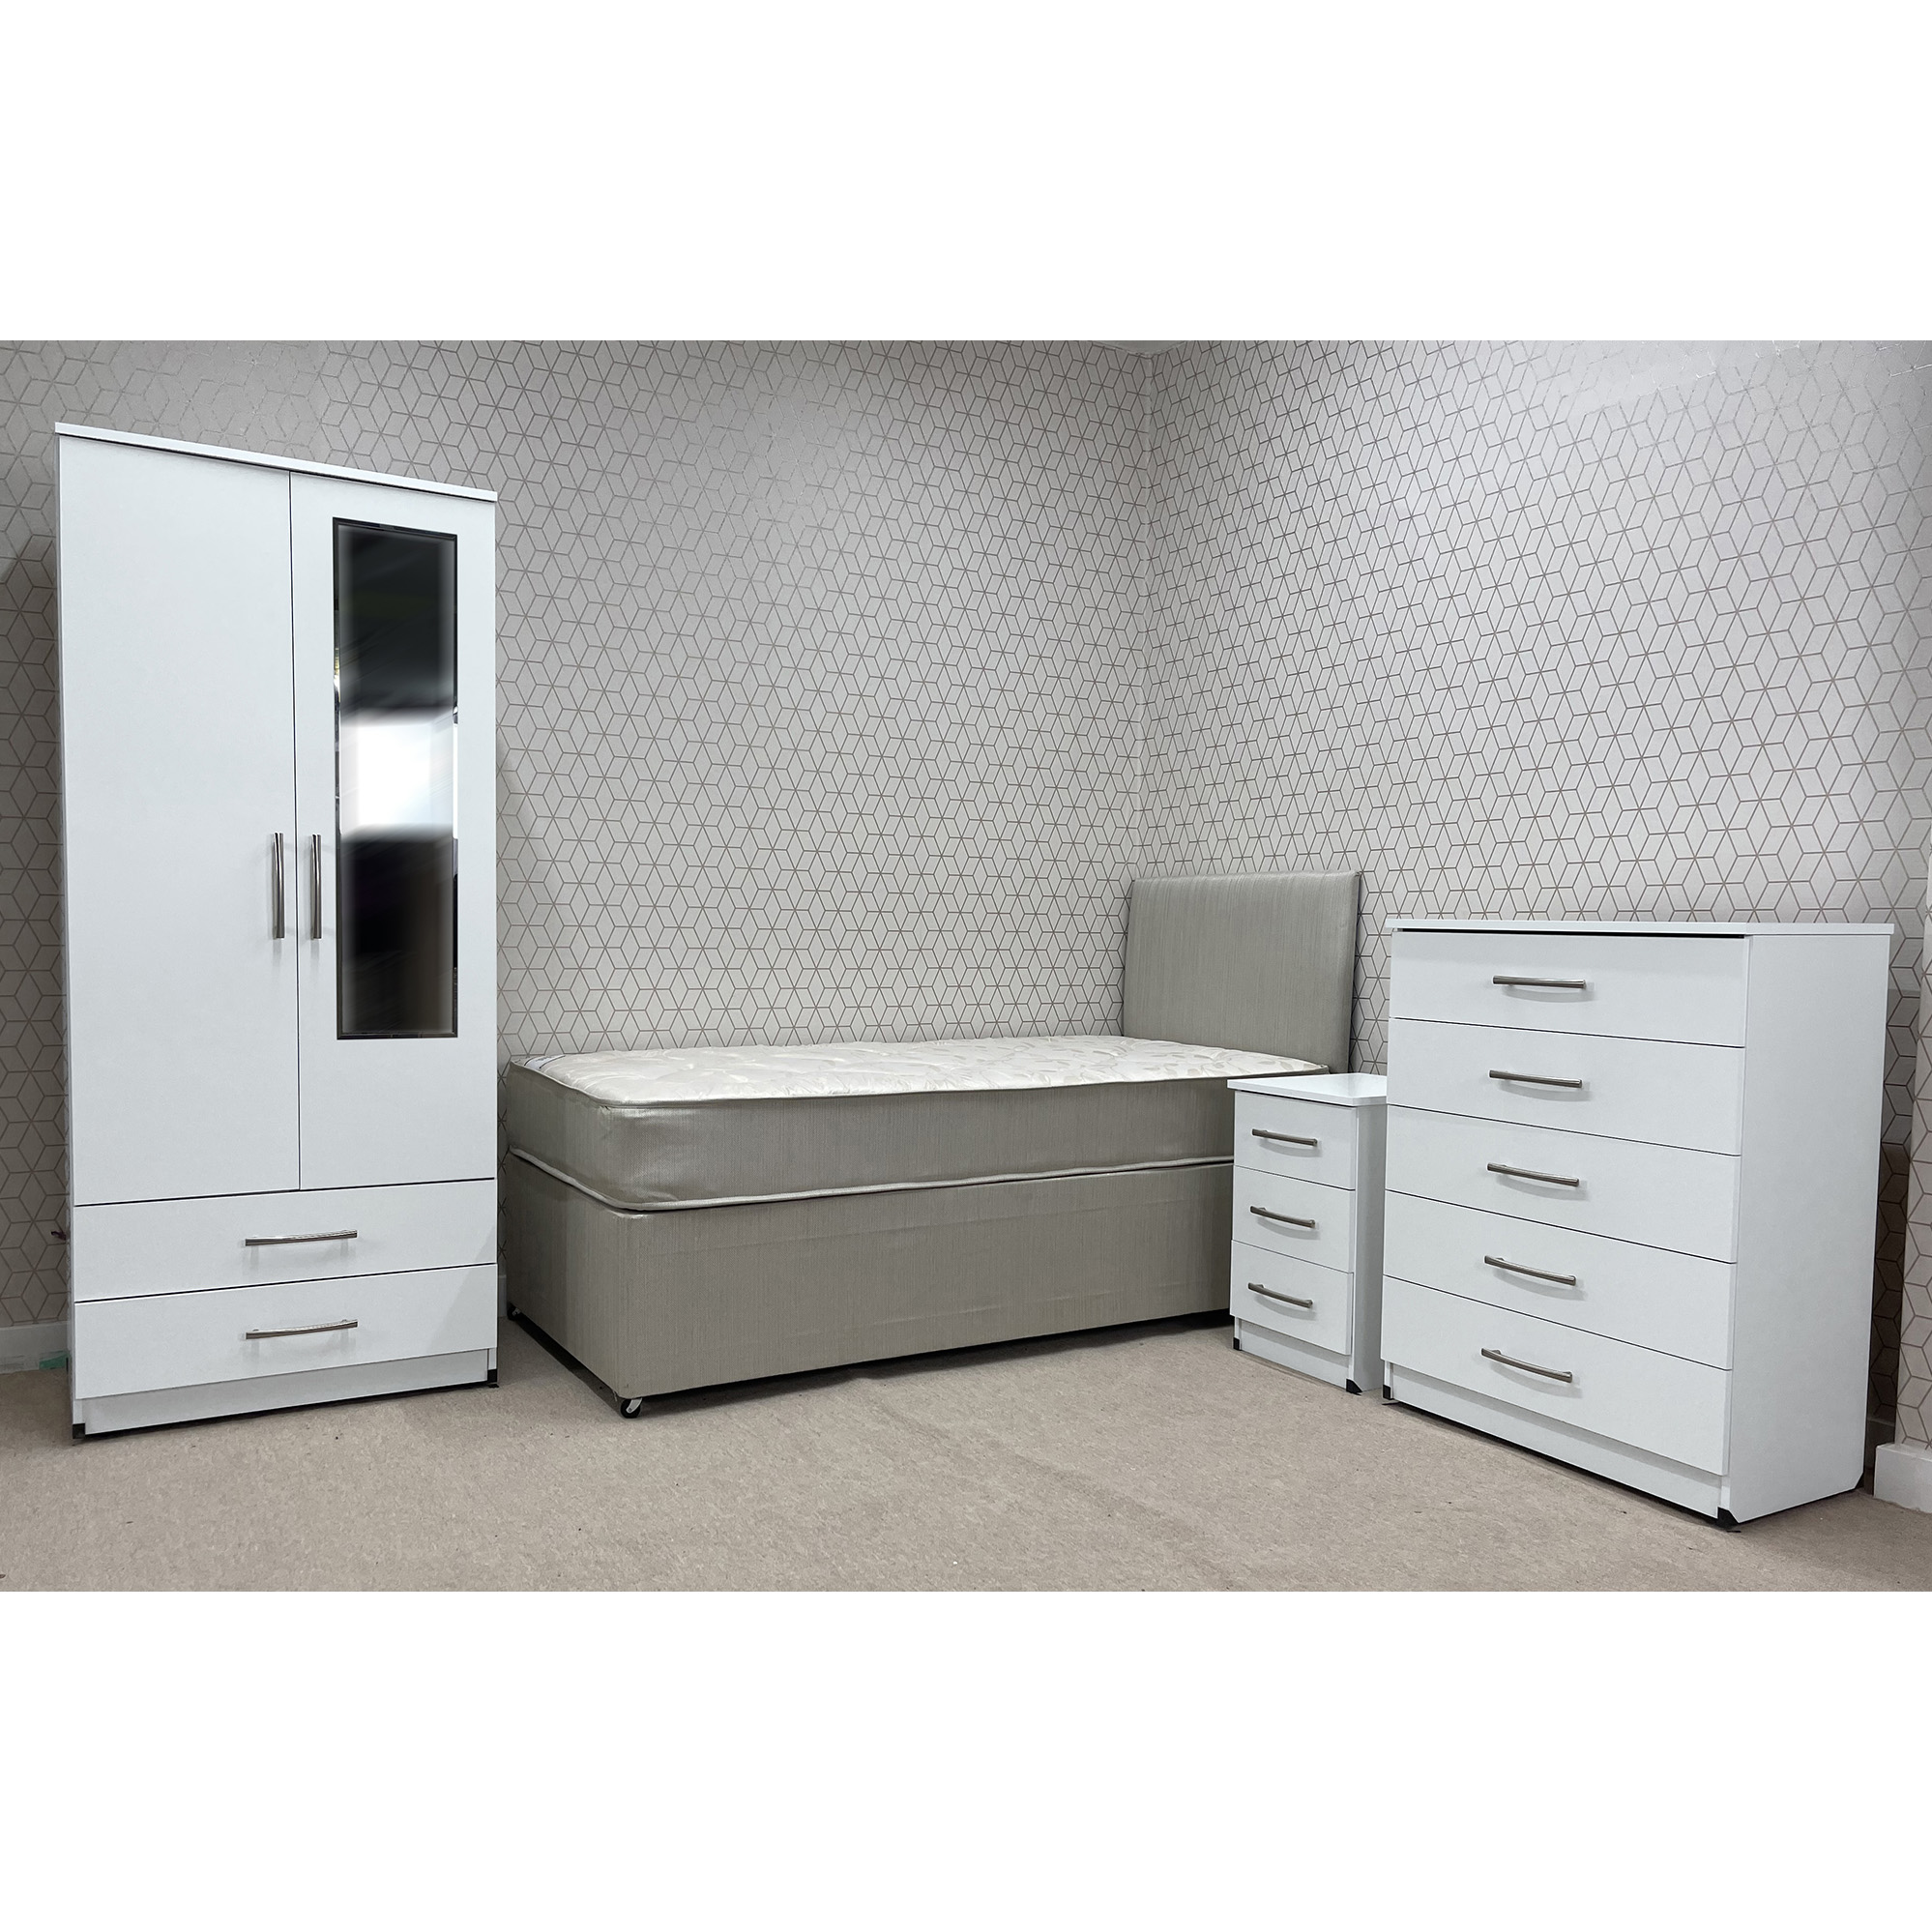 HMO furniture package - landlord Furniture package